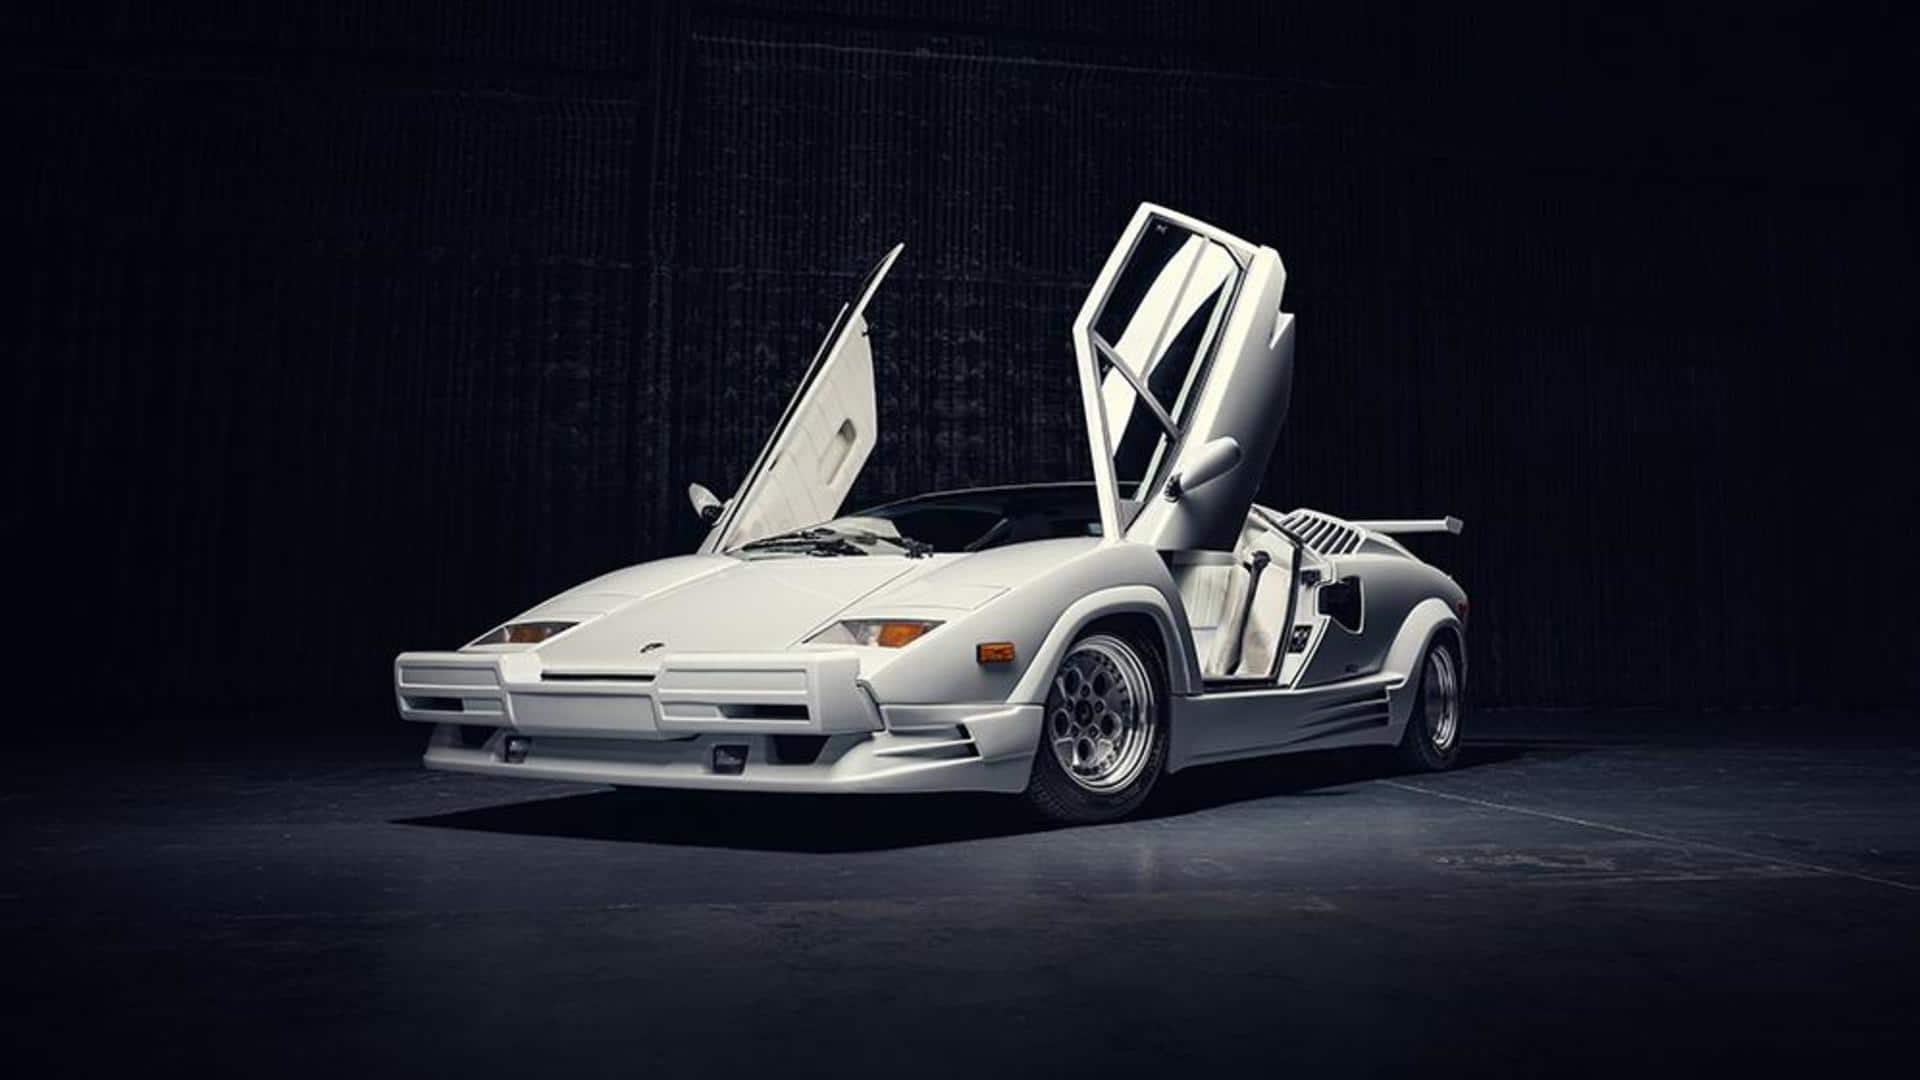 Lamborghini Countach from Wolf of Wall Street hits auction block